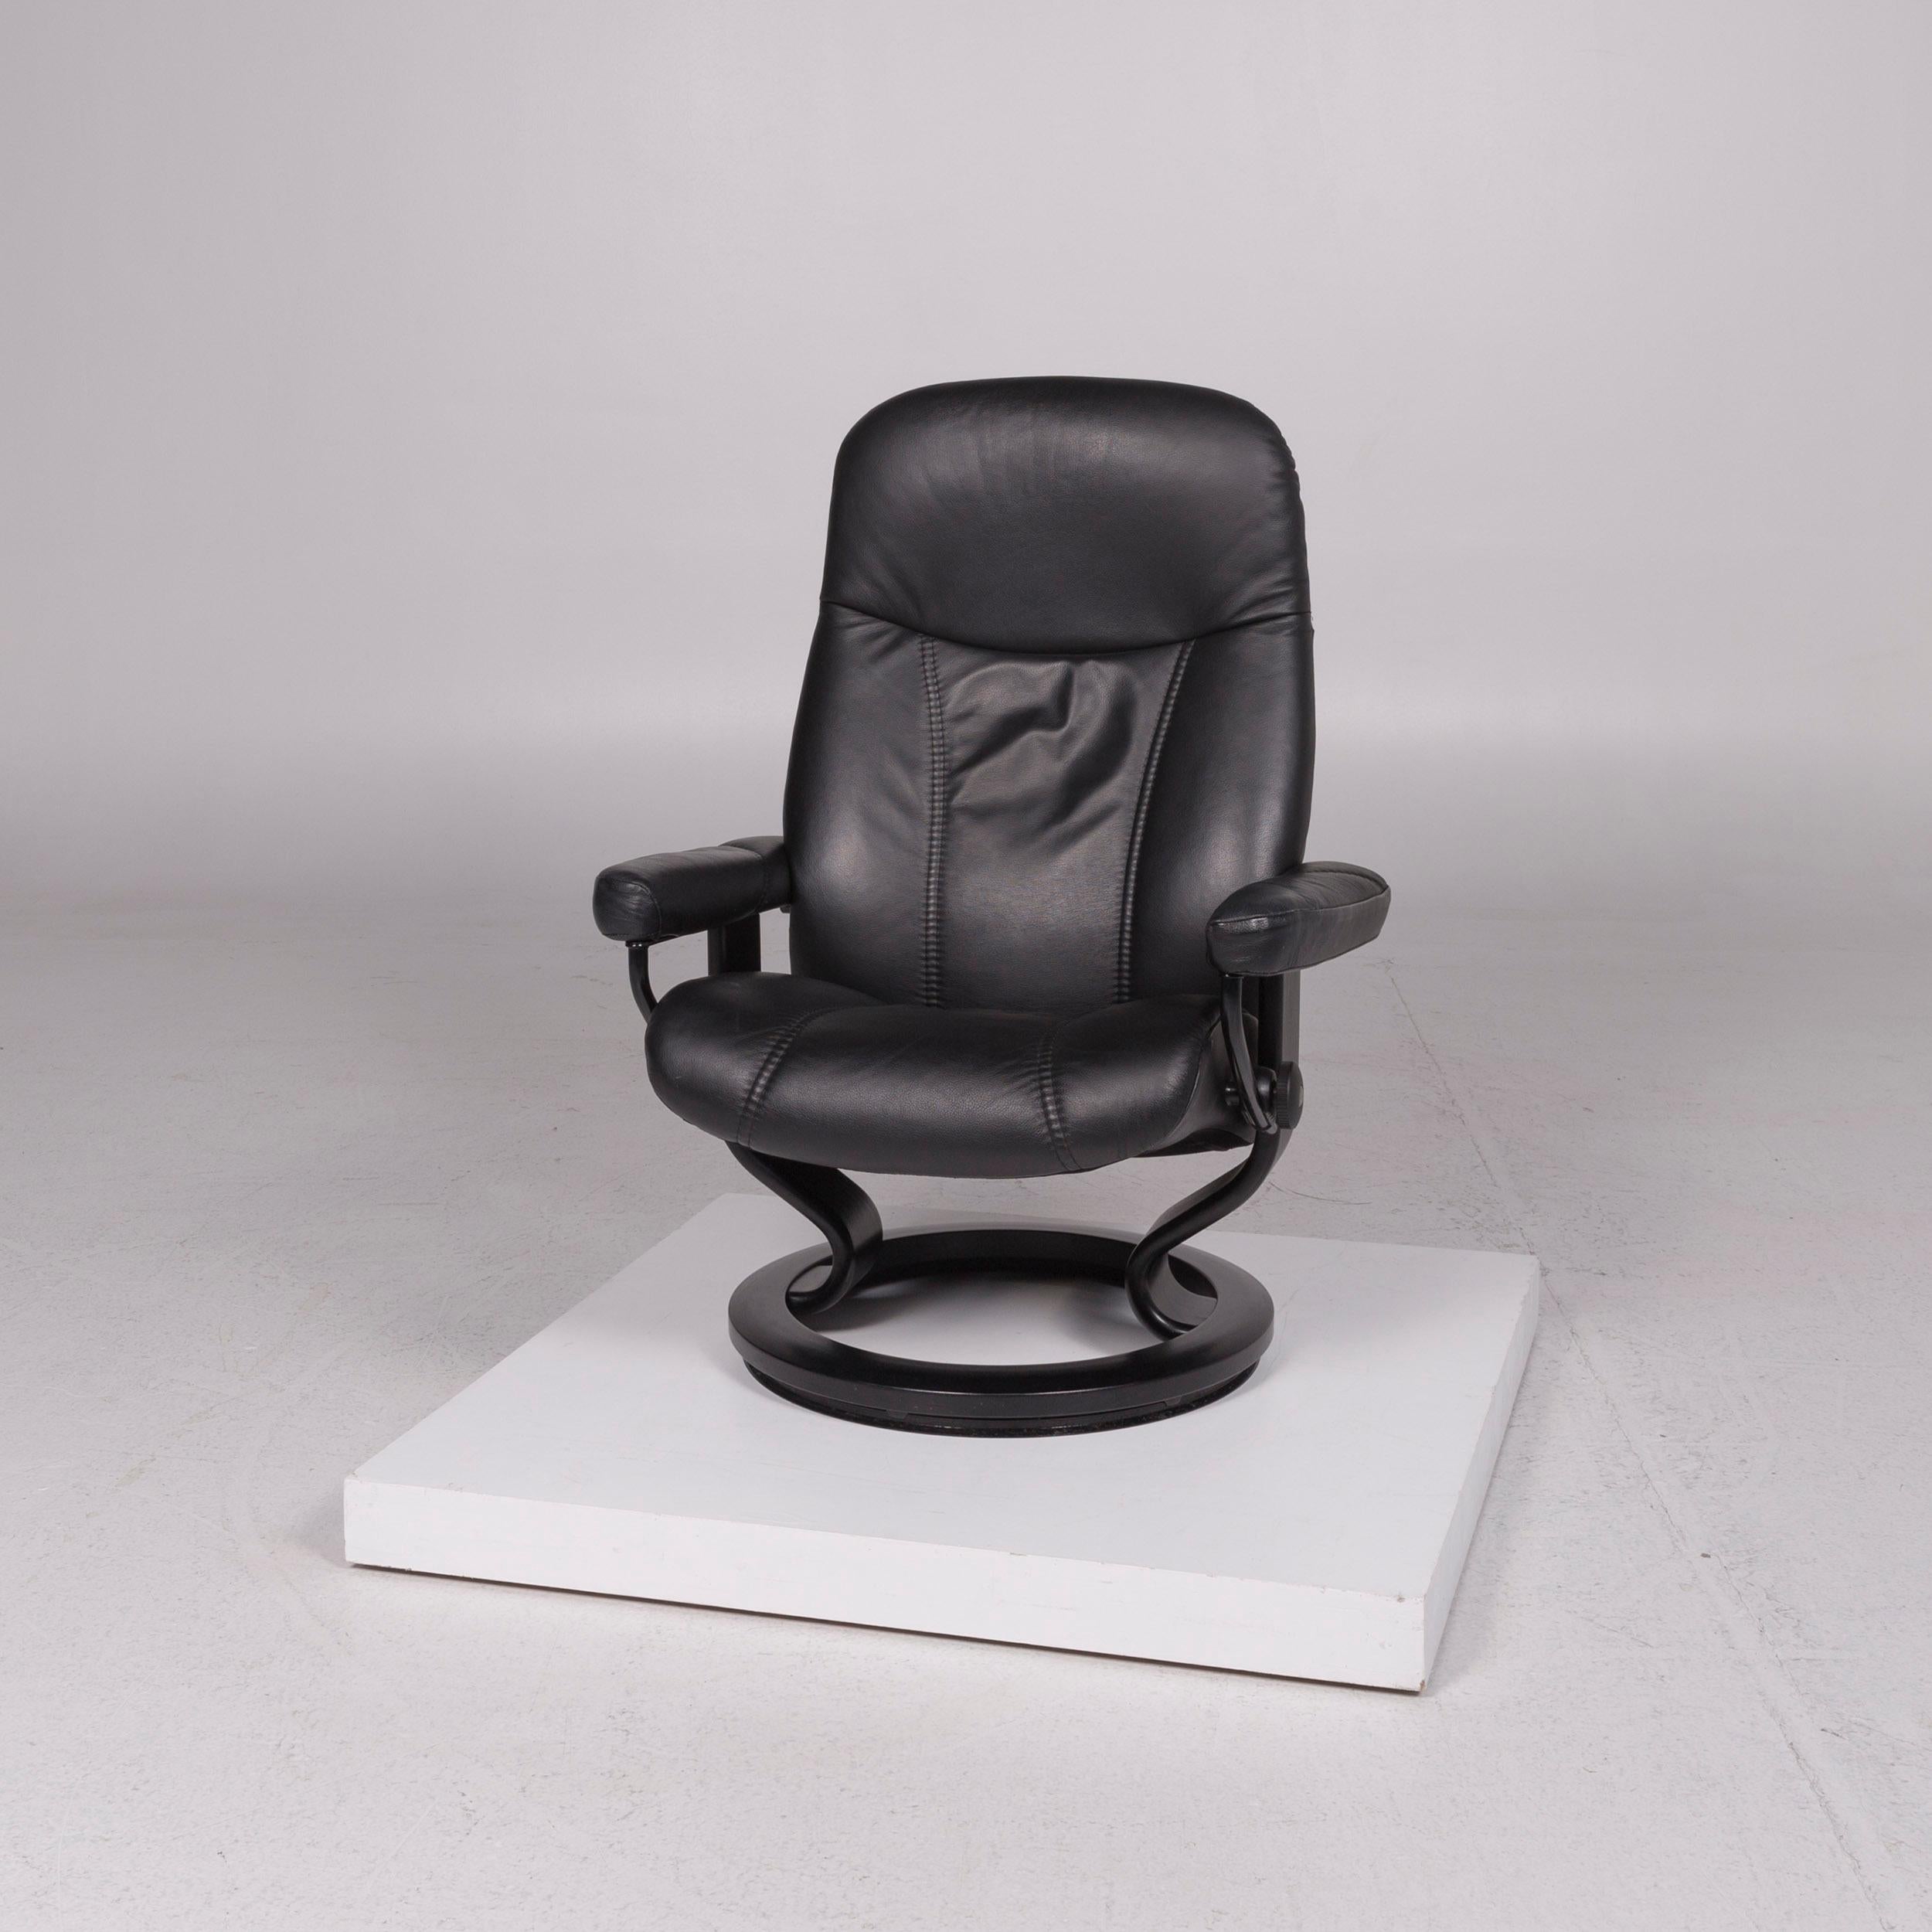 Modern Stressless Consul Leather Armchair Black Incl. Stool Size M Relax Function